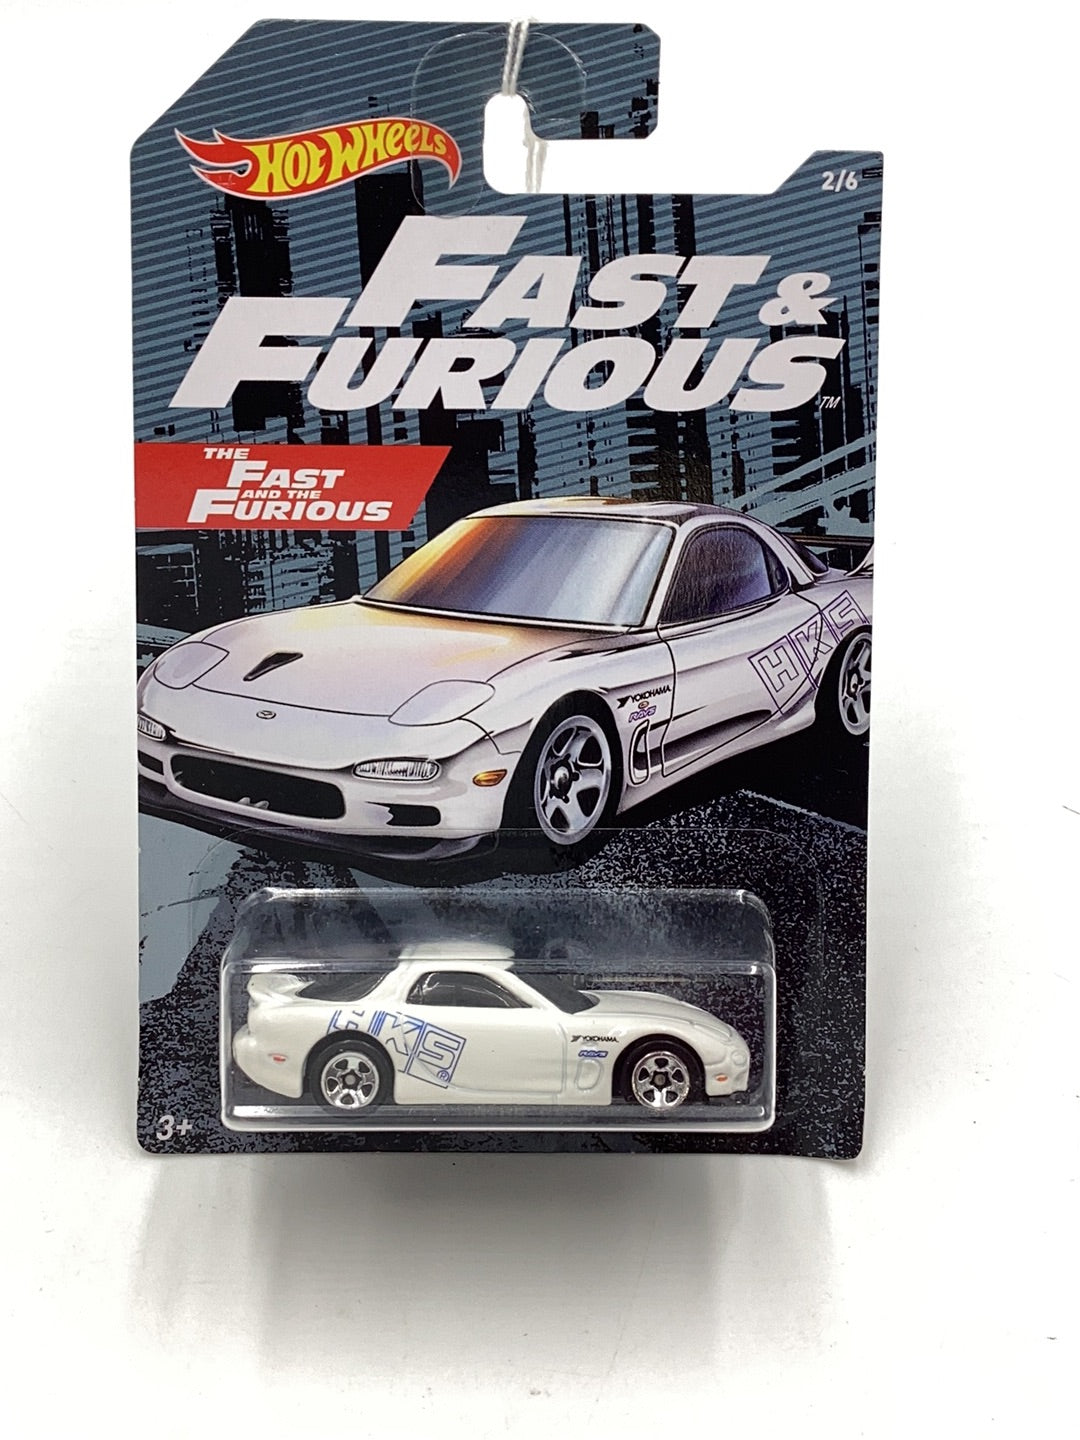 Hot wheels fast and furious 2/6 95 Mazda RX-7 152C